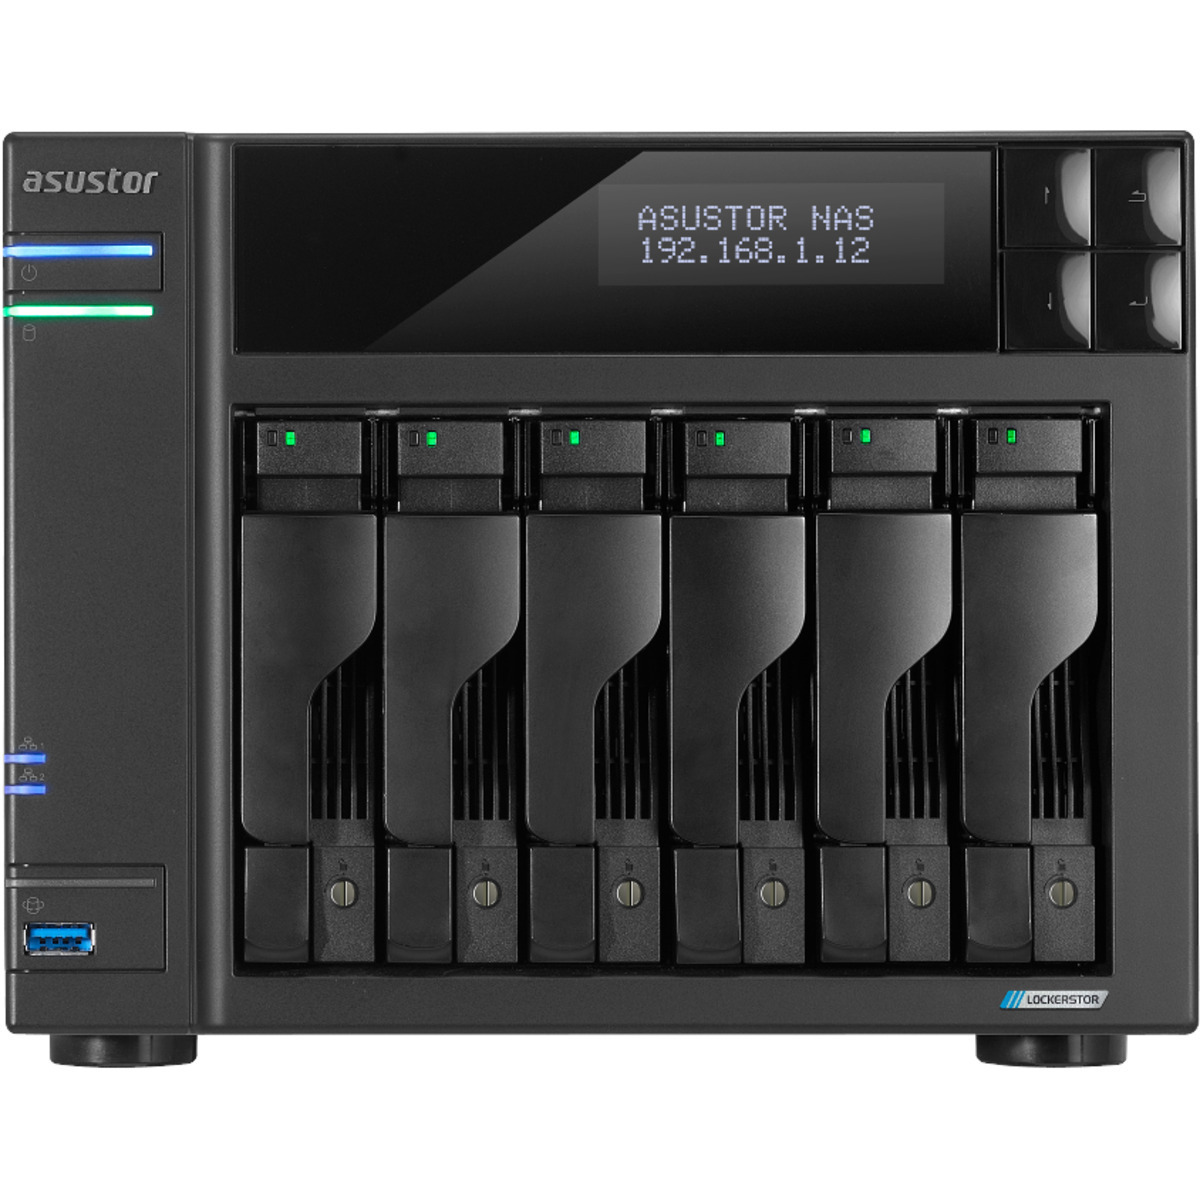 ASUSTOR LOCKERSTOR 6 Gen2 AS6706T 36tb 6-Bay Desktop Multimedia / Power User / Business NAS - Network Attached Storage Device 3x12tb Seagate IronWolf ST12000VN0008 3.5 7200rpm SATA 6Gb/s HDD NAS Class Drives Installed - Burn-In Tested - FREE RAM UPGRADE LOCKERSTOR 6 Gen2 AS6706T